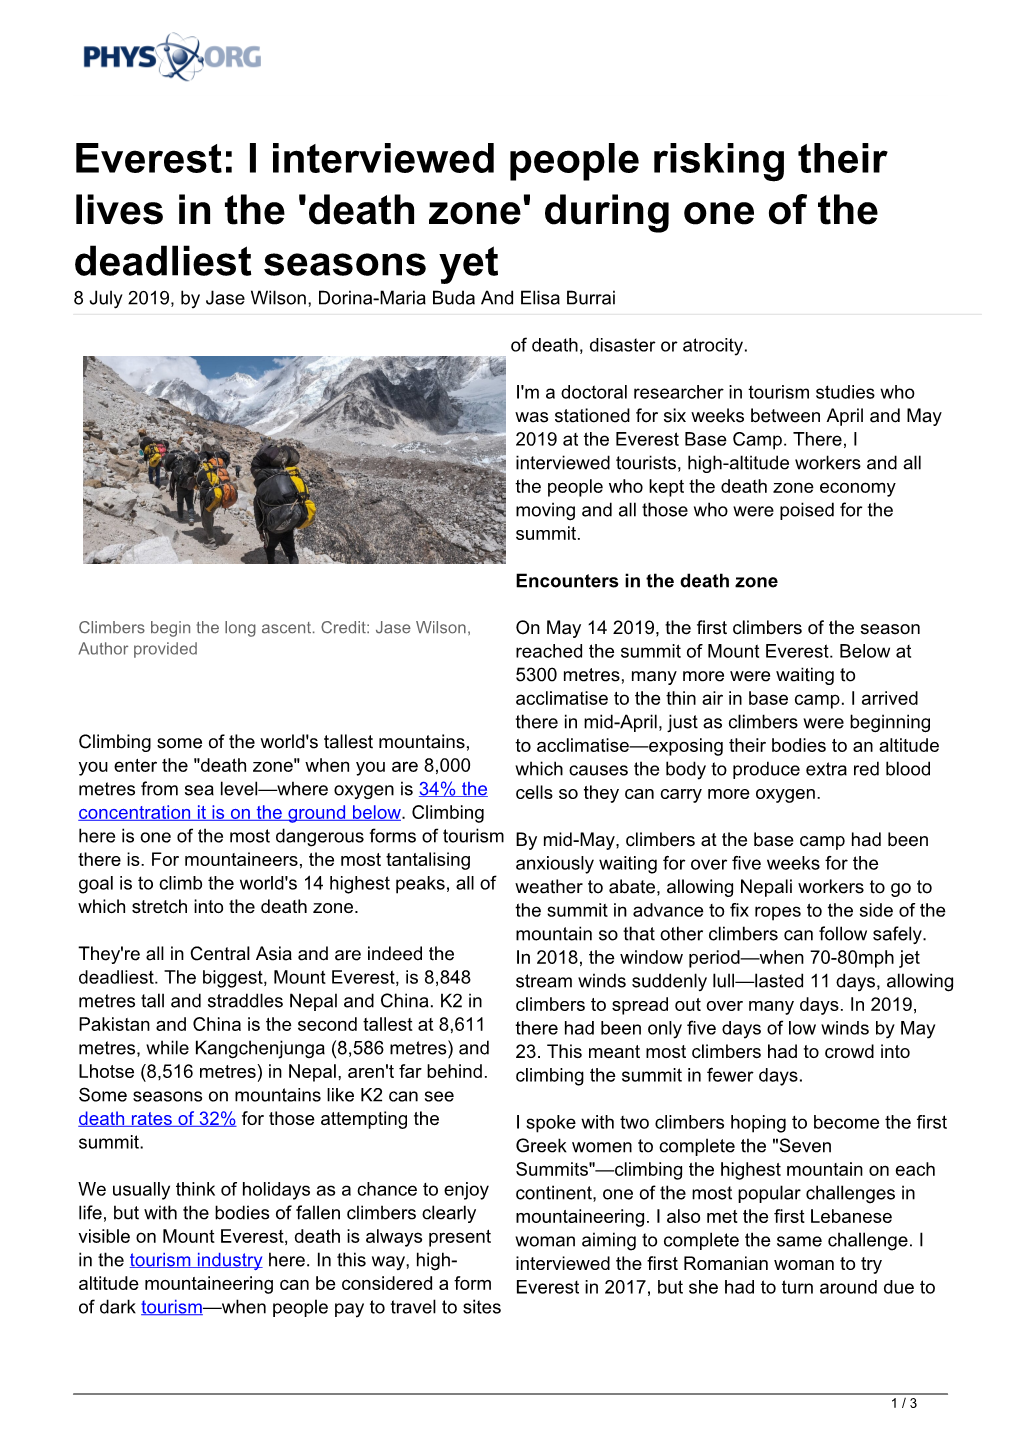 Death Zone' During One of the Deadliest Seasons Yet 8 July 2019, by Jase Wilson, Dorina-Maria Buda and Elisa Burrai